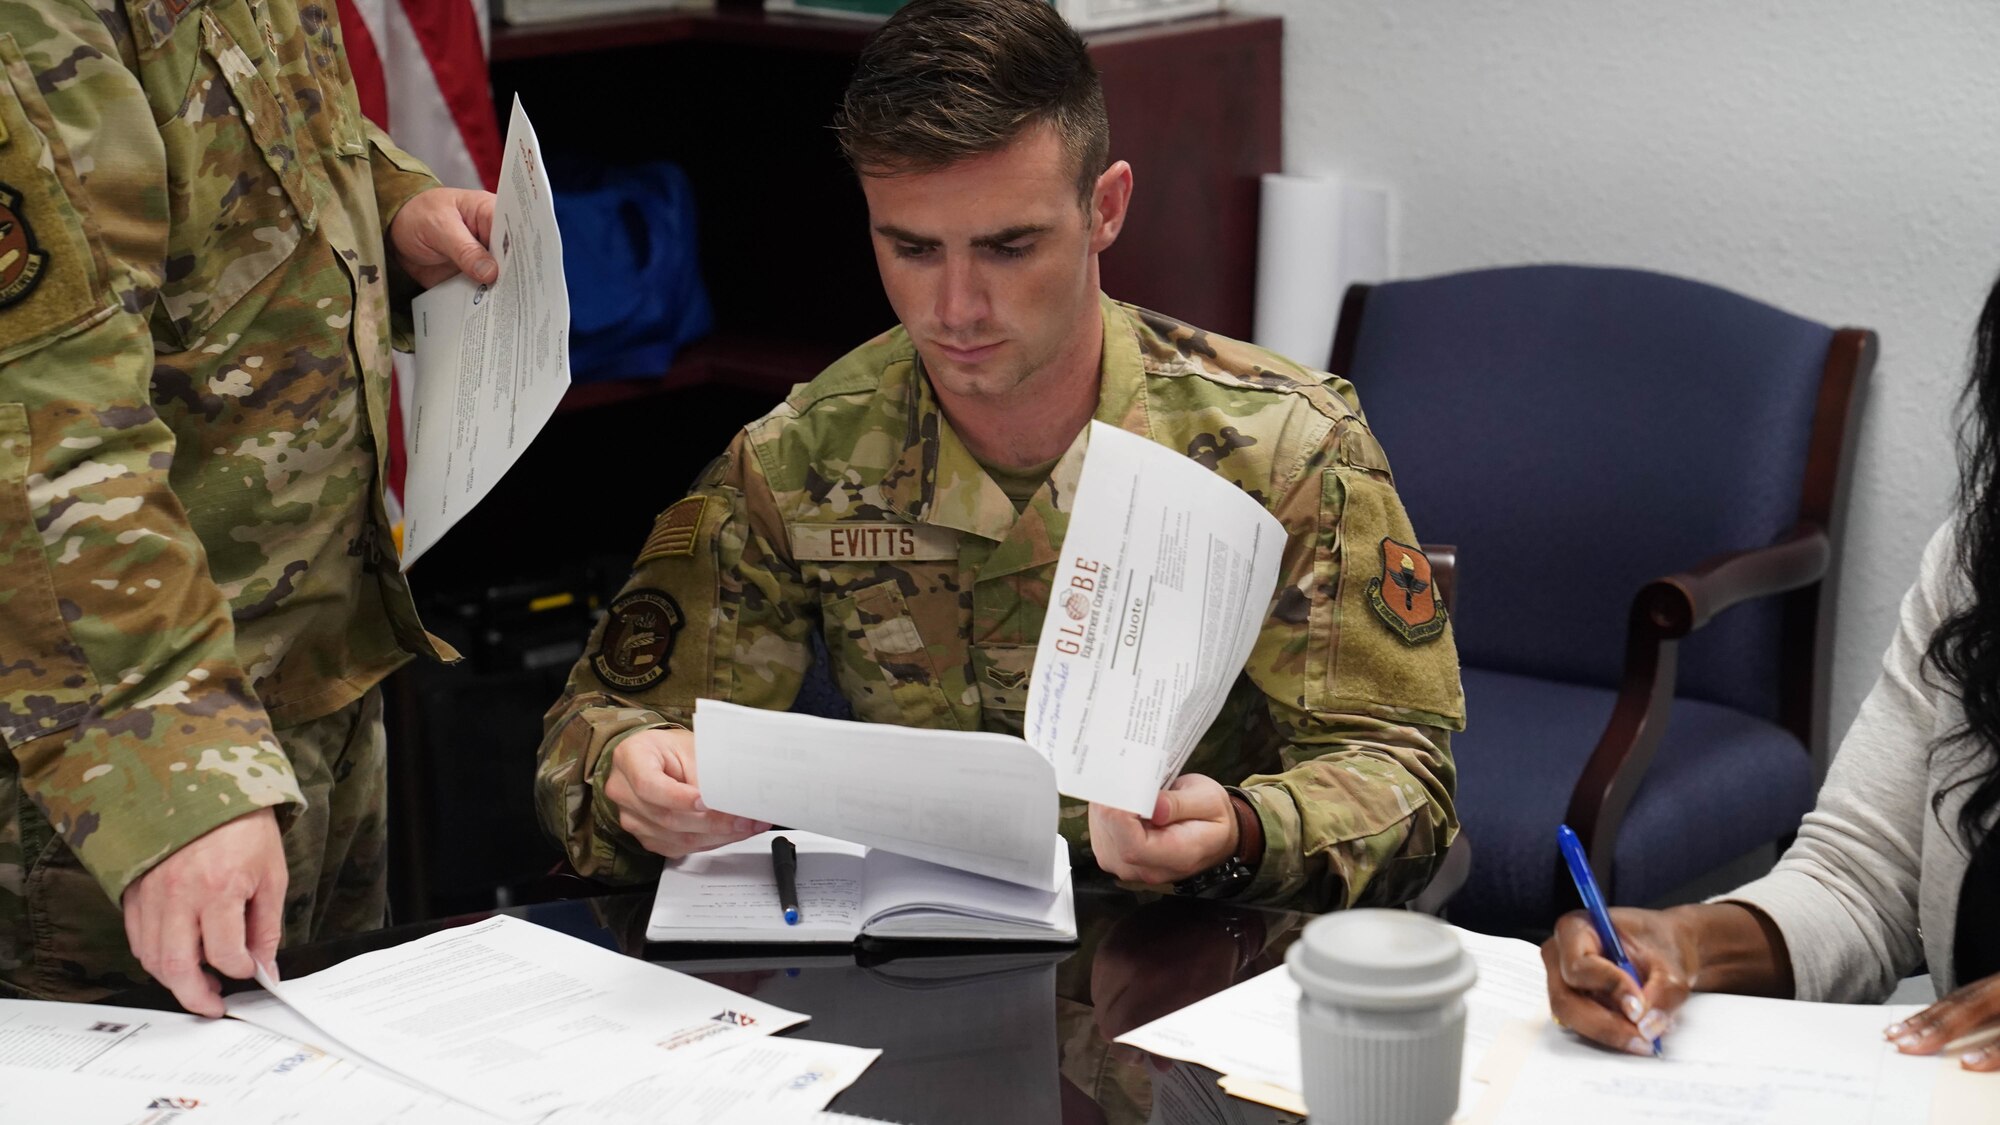 U.S. Air Force Airman 1st Class Andrew Evitts, 81st Contracting Squadron contract specialist, reads over a contract during the 81st CONS roadshow at Keesler Air Force Base, Mississippi, April 20, 2022. Members of the 81st CONS created the roadshow to improve processes and address an information gap between their staff and Keesler’s various units. (U.S. Air Force photo by Airman 1st Class Elizabeth Davis)